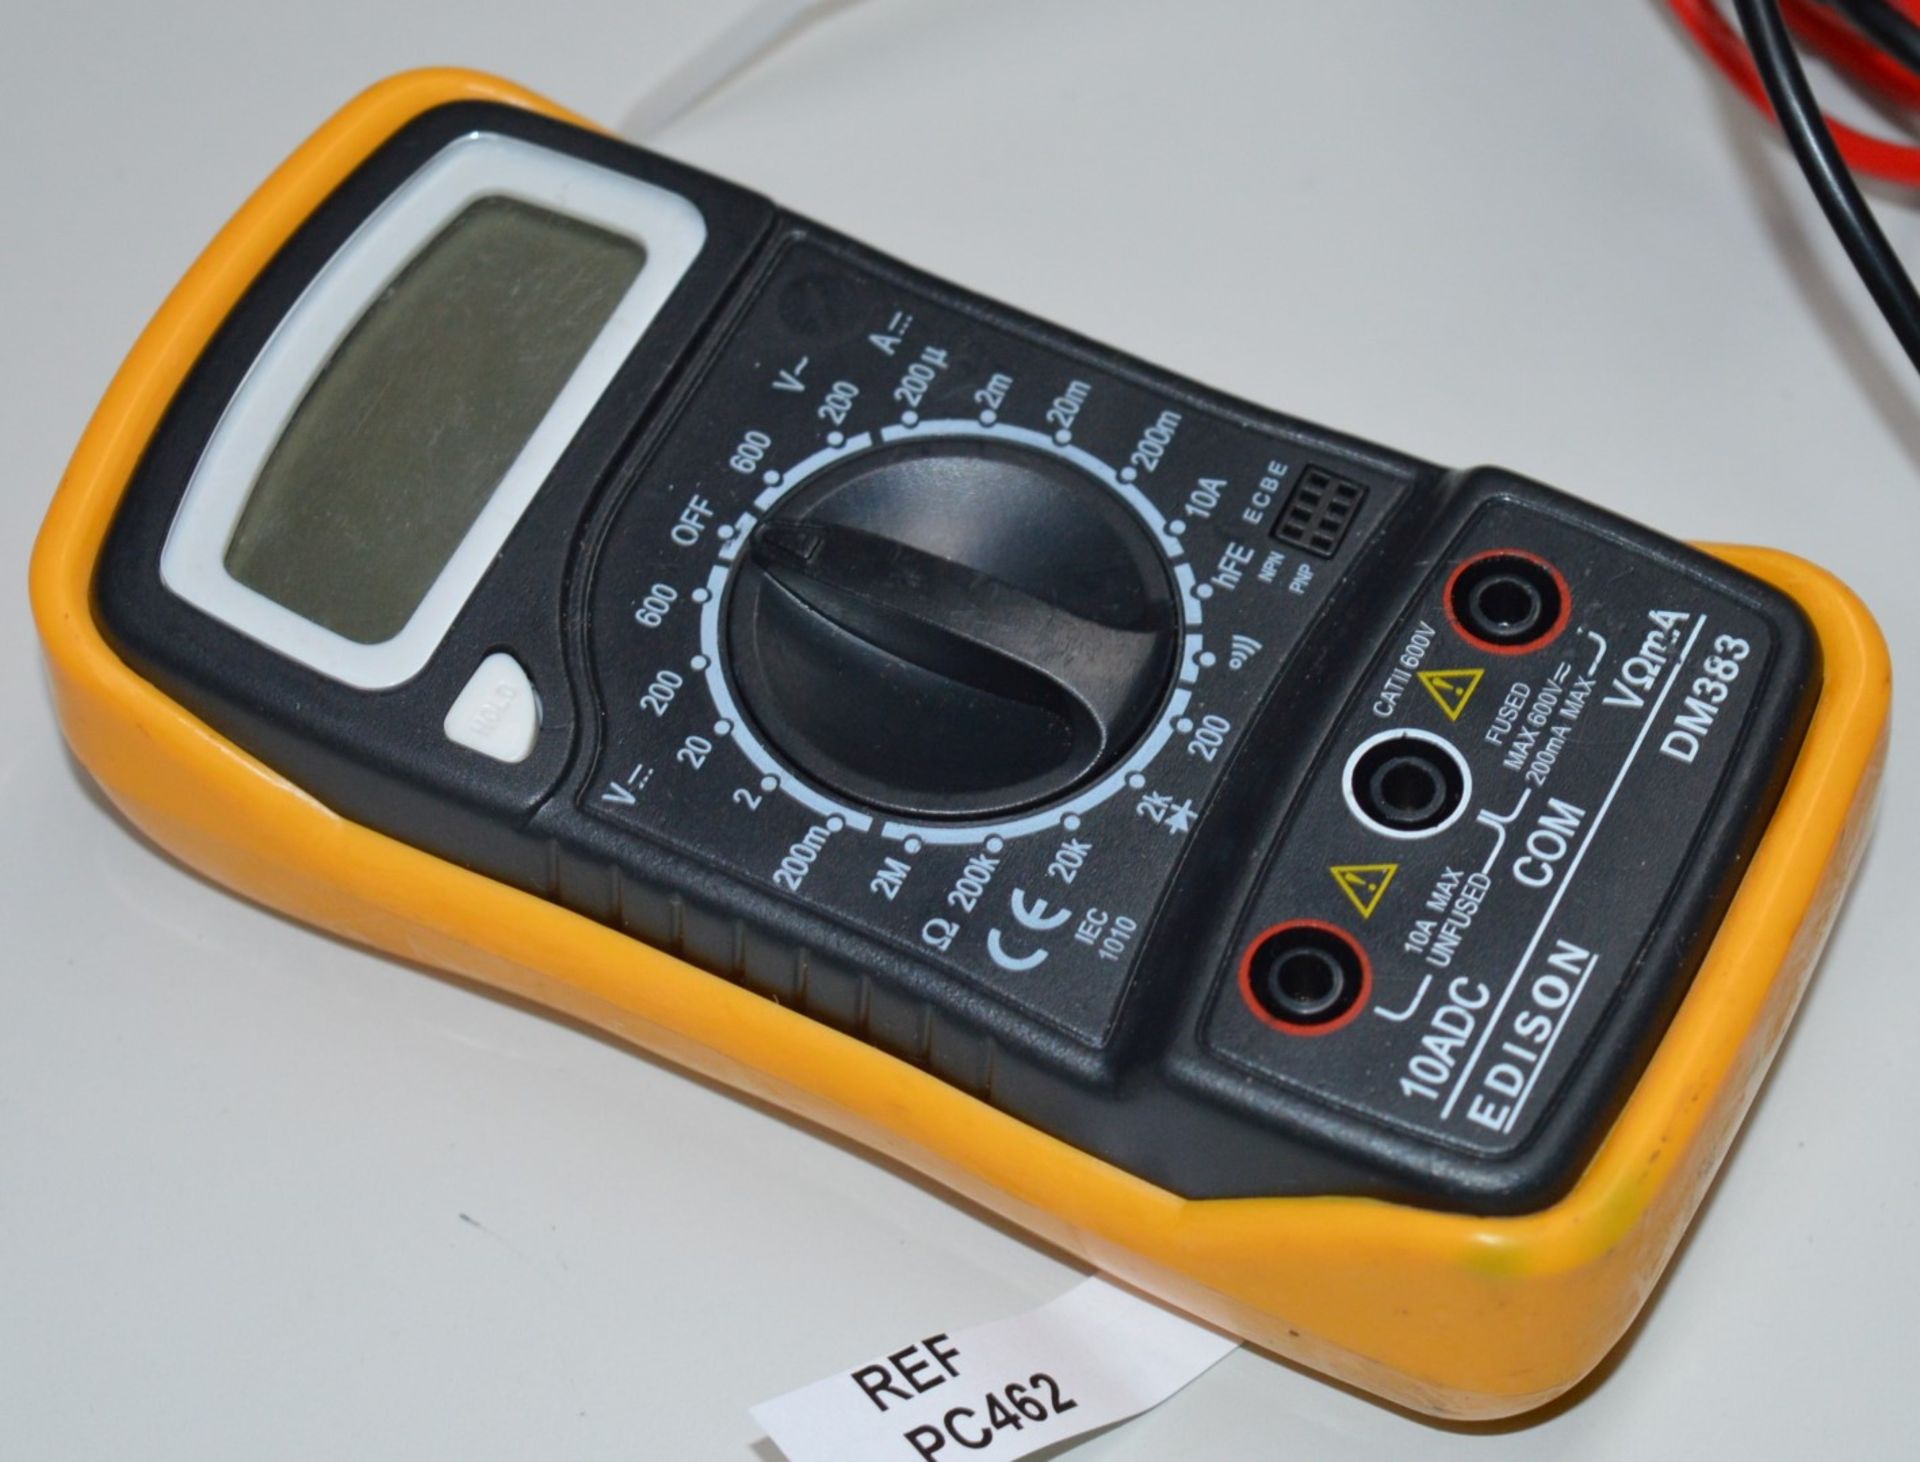 1 x Edison DM383 10ADC Multimeter With Probes - CL300 - Ref PC462 - Location: Altrincham WA14 - Image 2 of 2